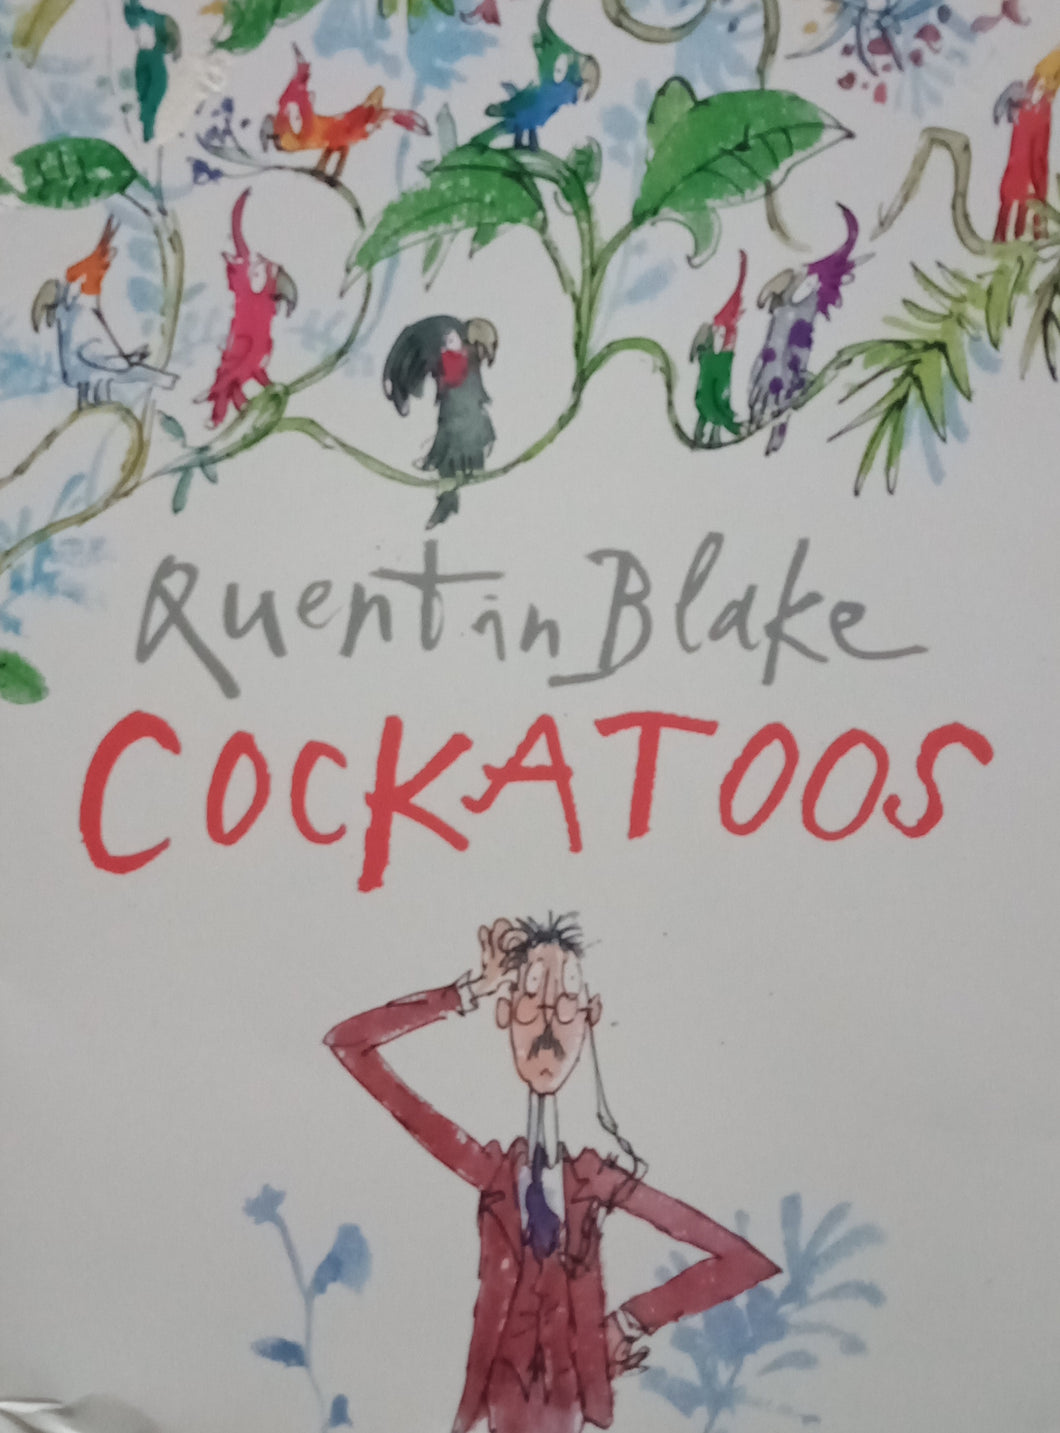 Cockatoos by Quentin Blake